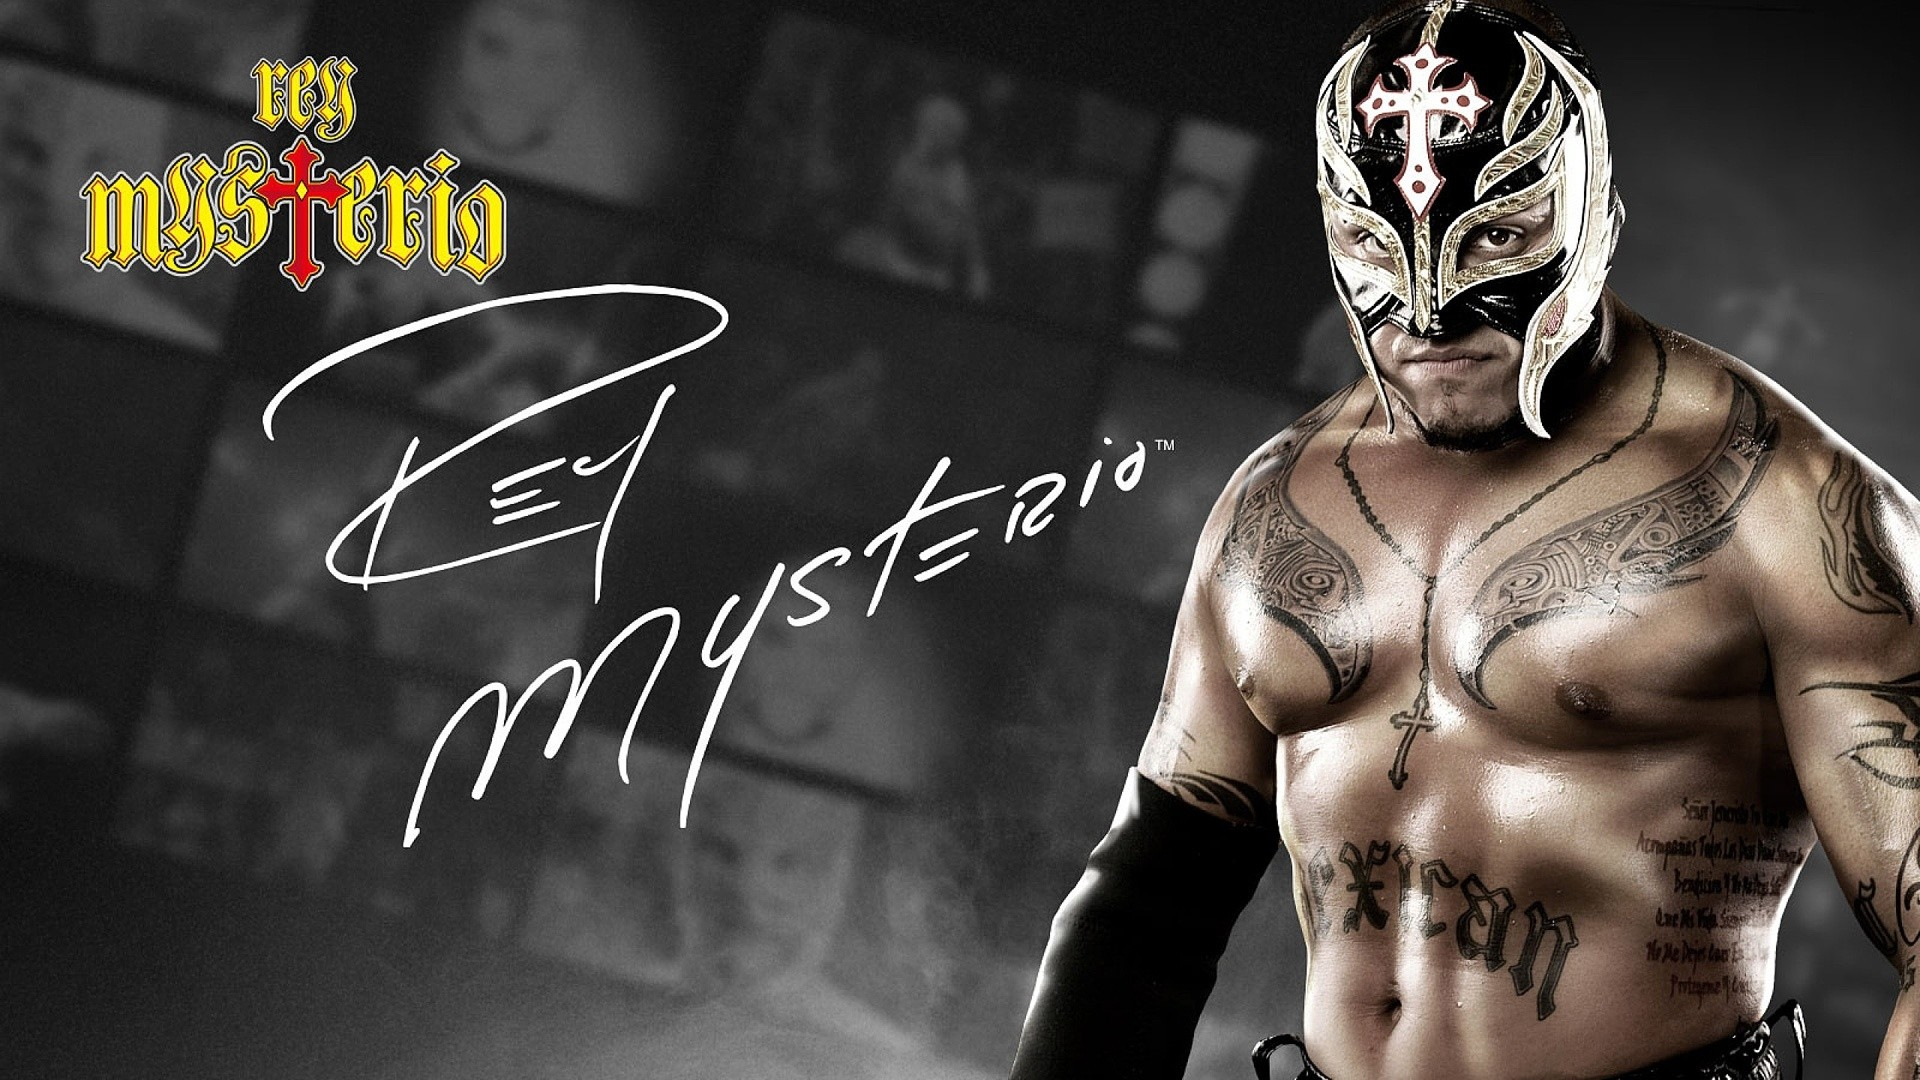 1920x1080 Rey Misterio Wallpapers 2018 (87+ pictures